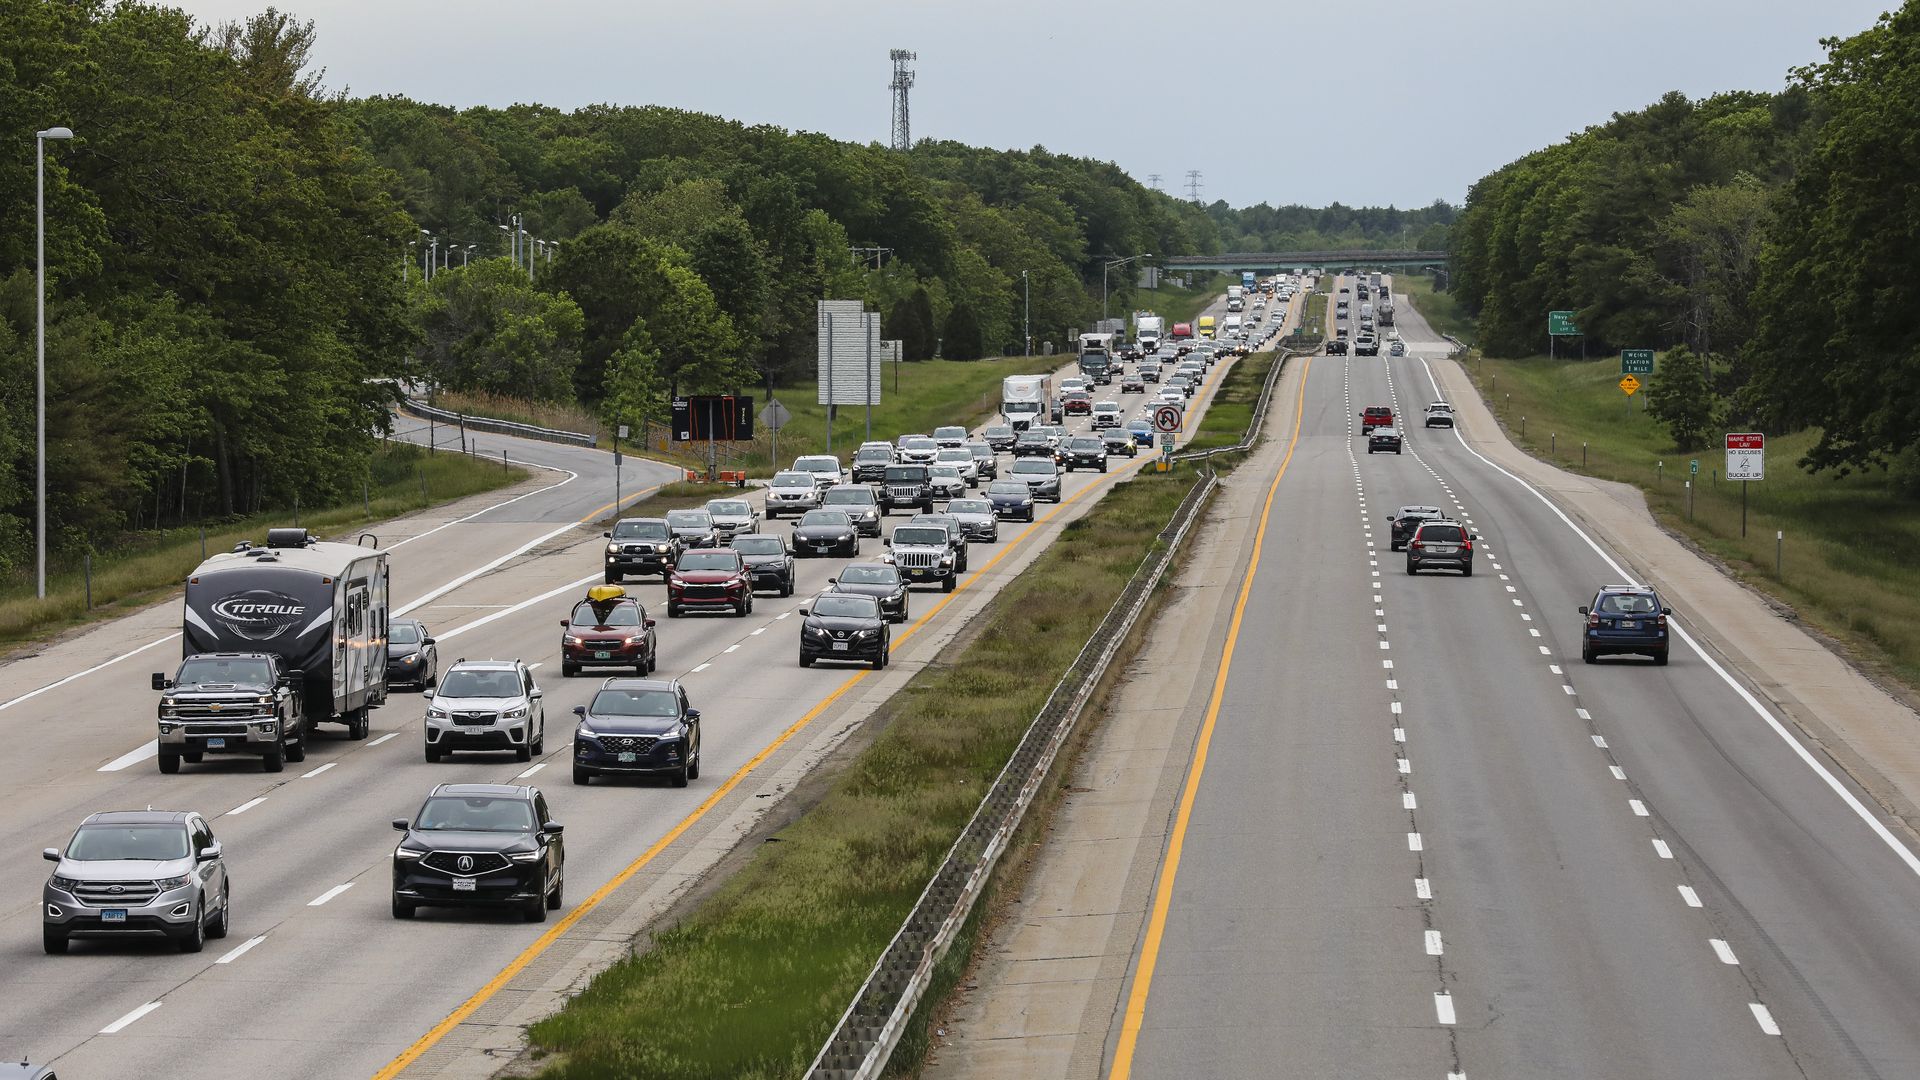 The southbound lane of the Maine Turnpike remains relatively empty while the northbound buzzes with traffic as people drive up to Maine for Memorial Day weekend in York, ME on May 28, 2021. 